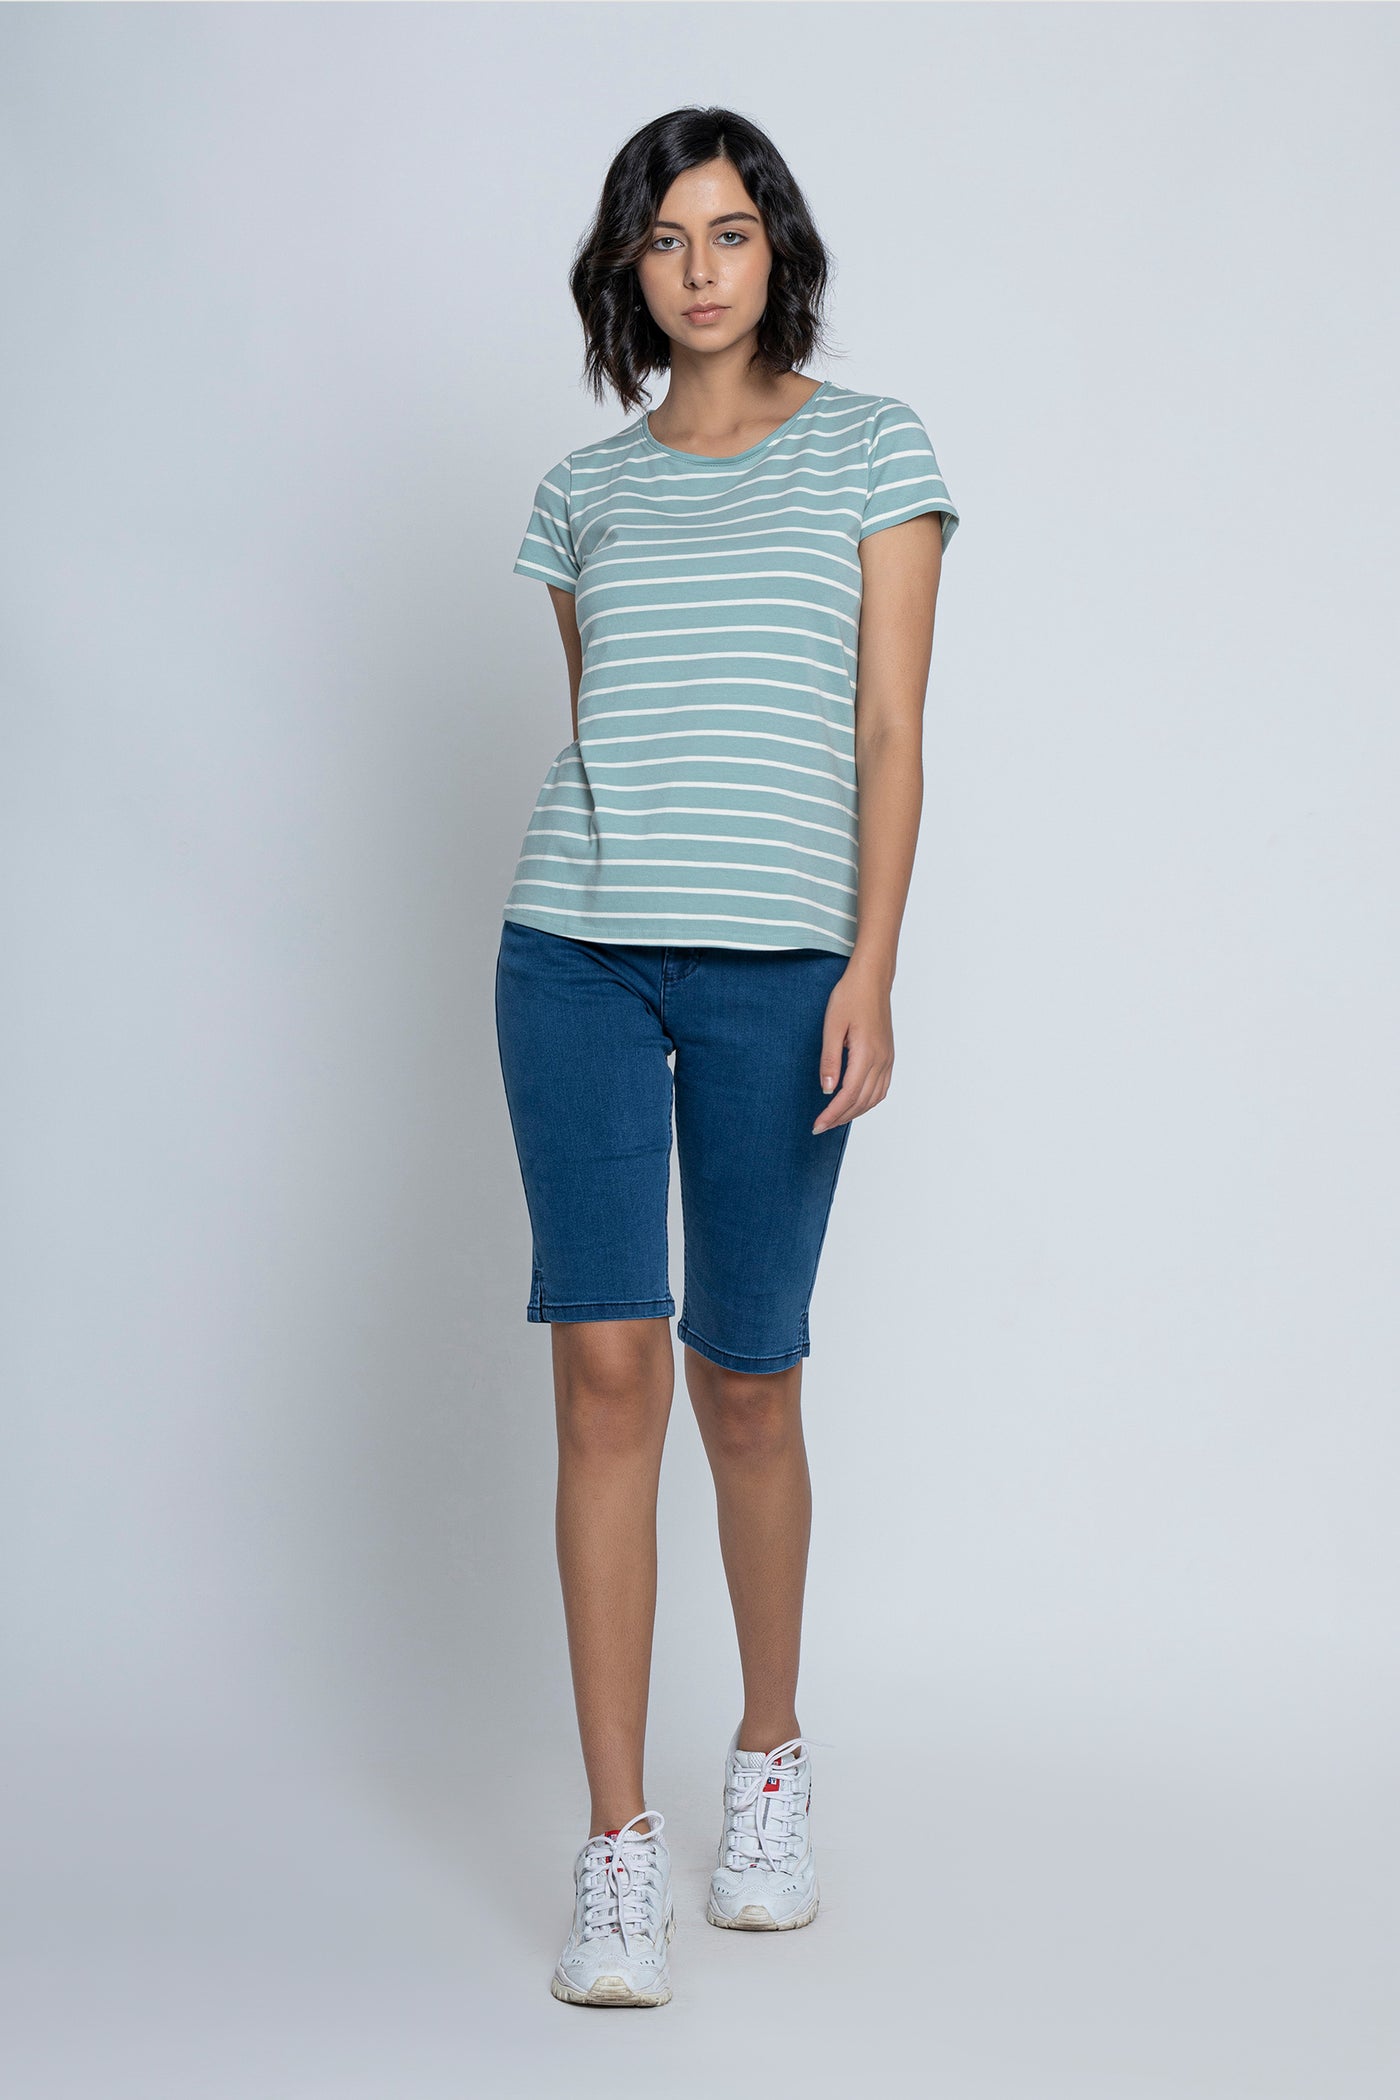 White with Sea Green Stripes Short Sleeves T-Shirt